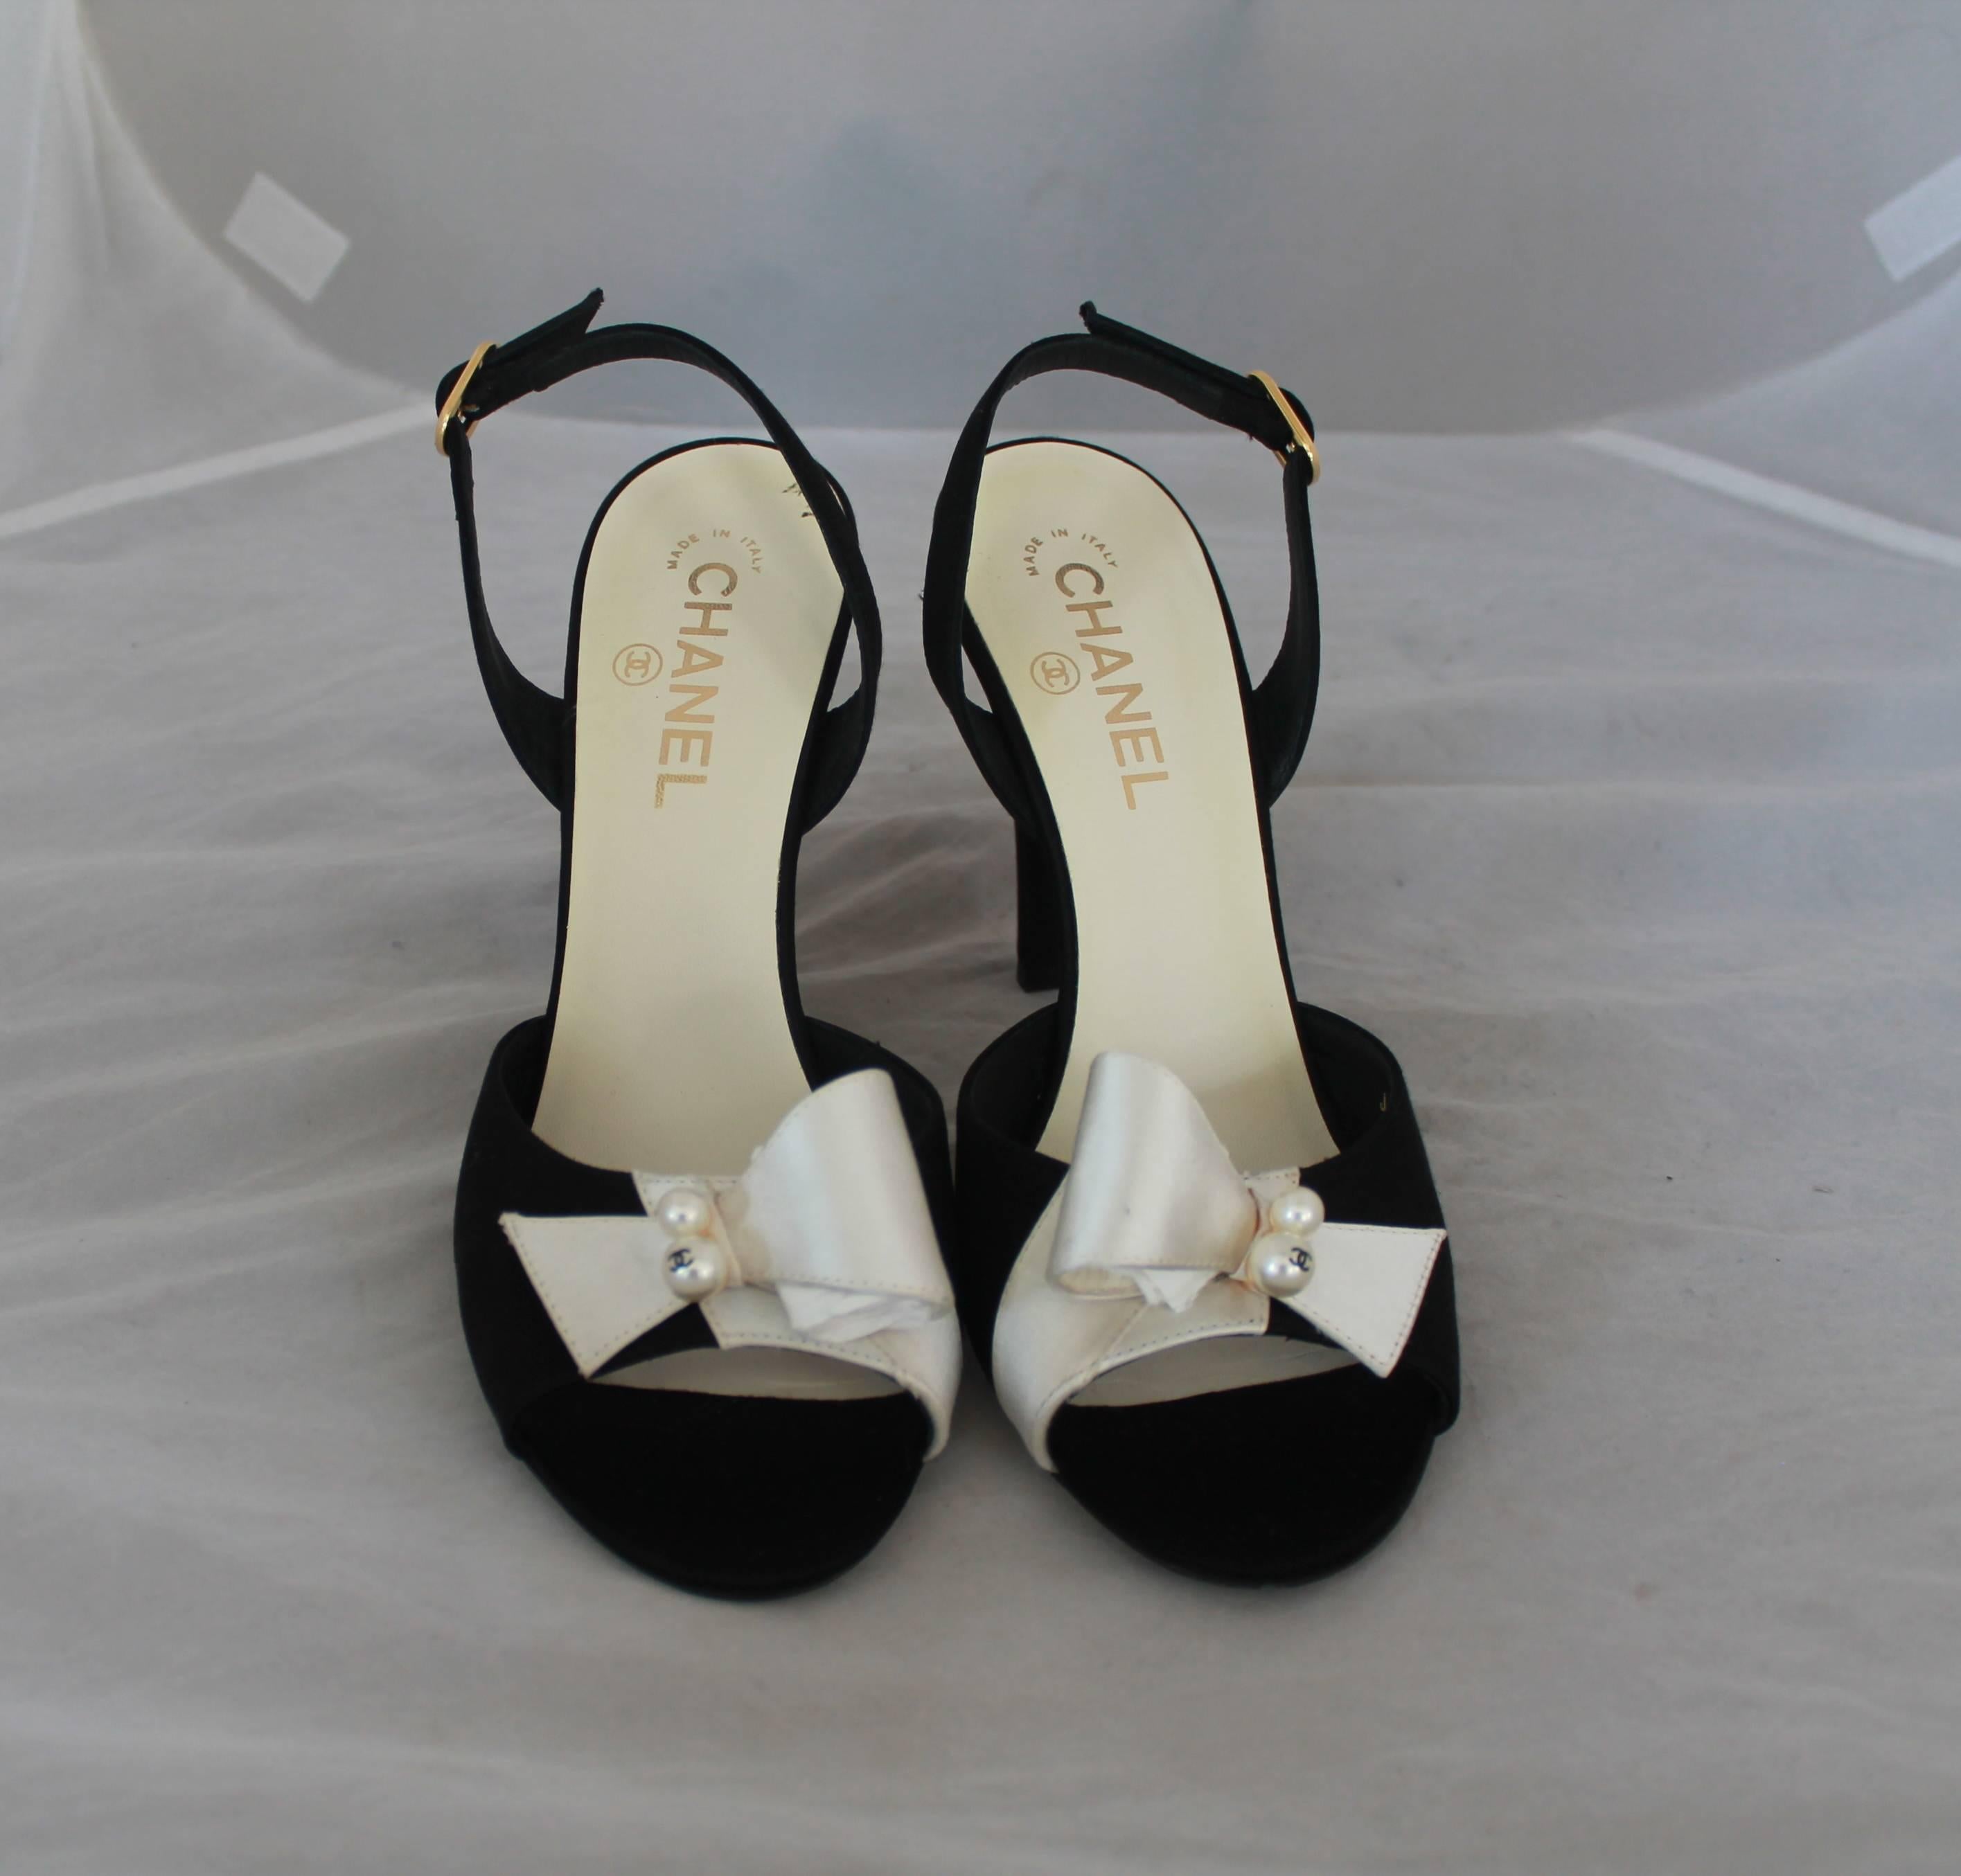 Chanel Black & Ivory Satin Open-Toe Sling Back Sandals w/ Front Bow - 40.  These elegant sling back sandals are in very good condition with minor bottom wear, a small mark on the right shoe near the heel as shown in Image 4, and a slight orange